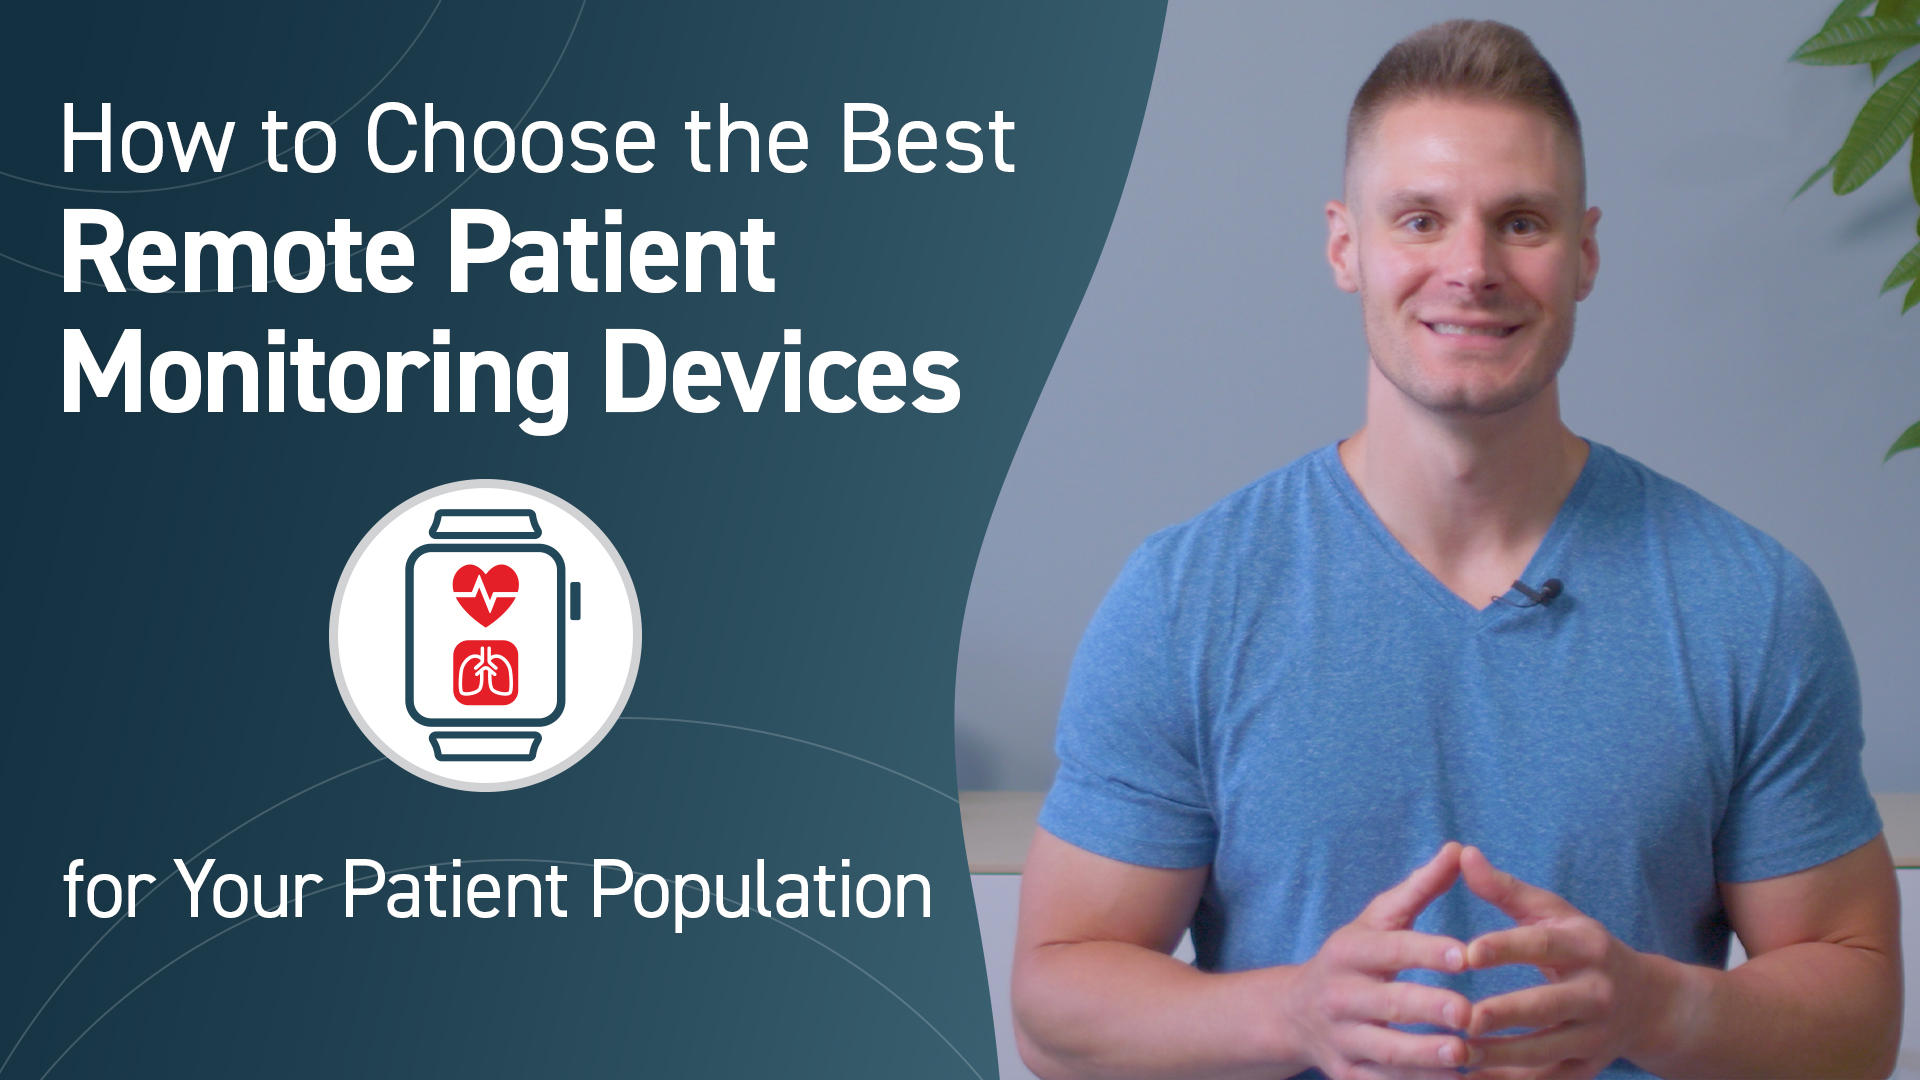 Choosing Remote Monitoring Devices for Your Patients